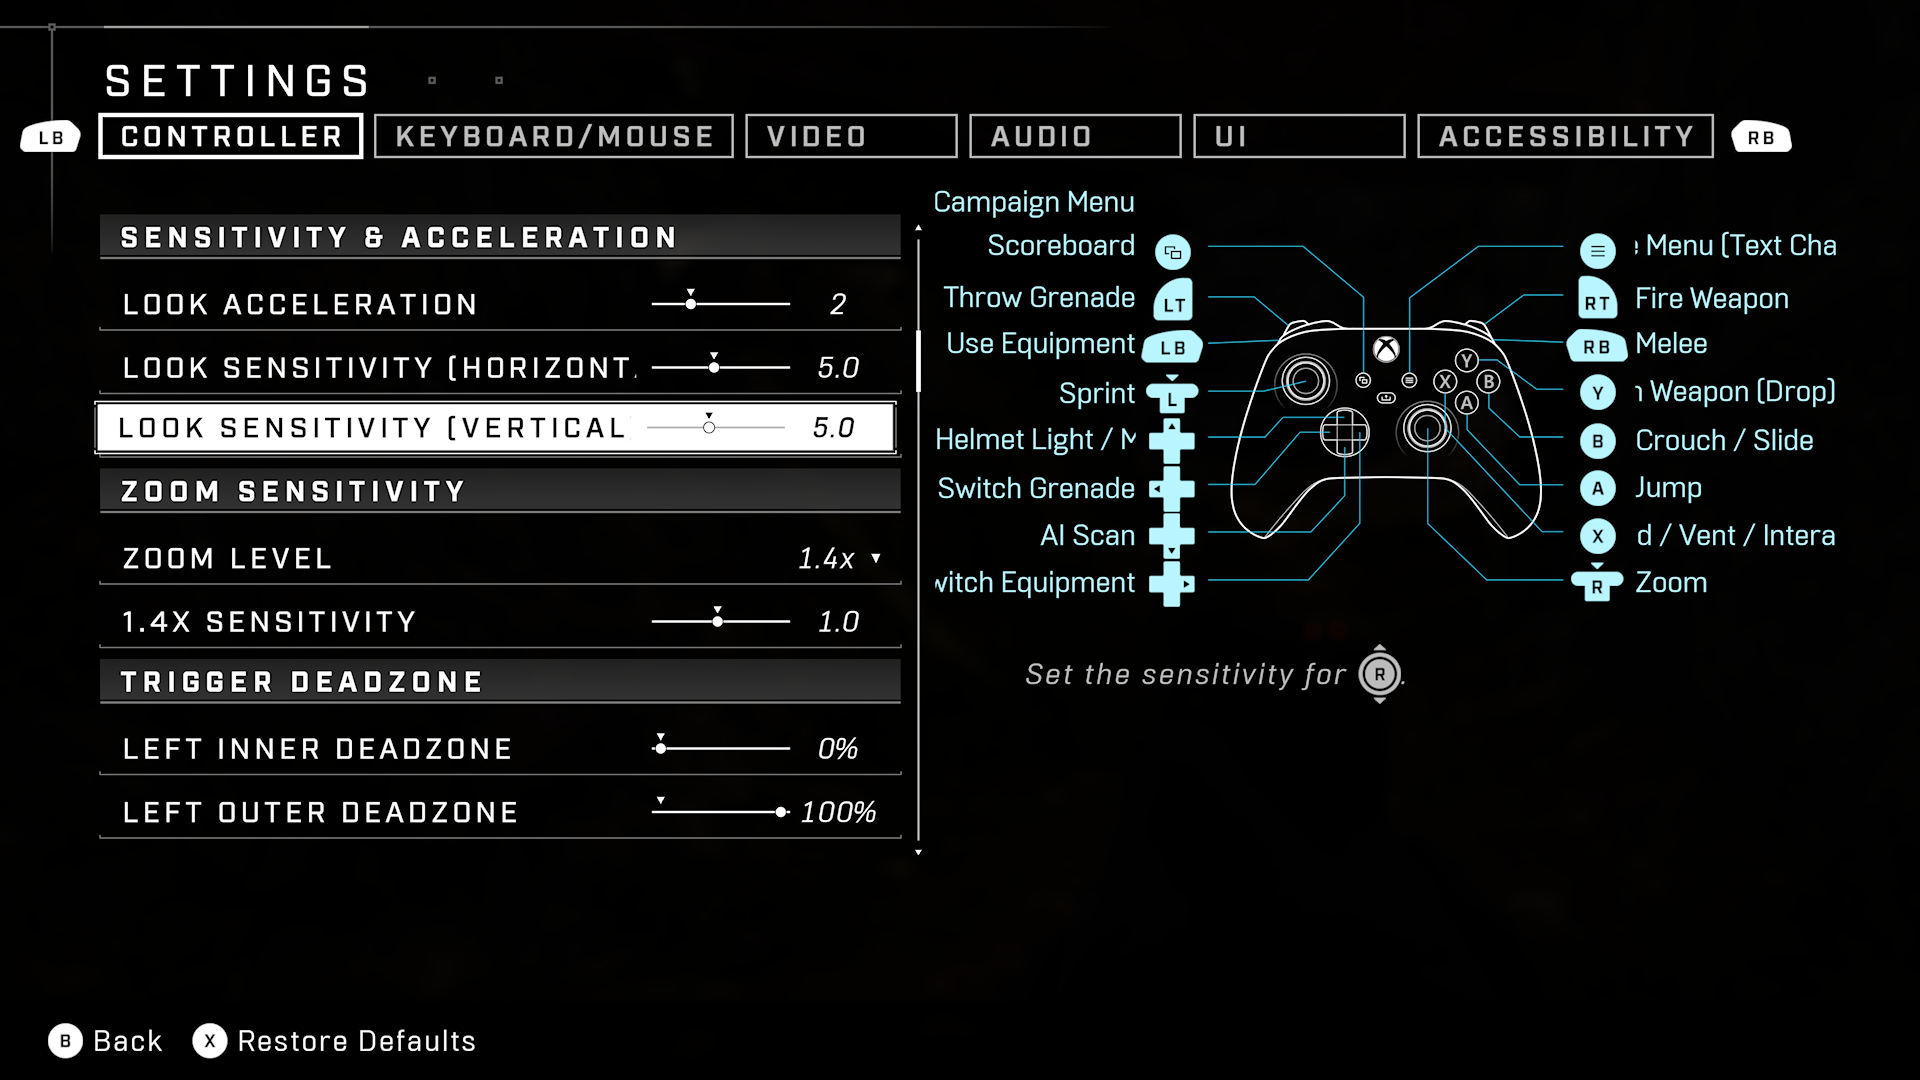 Halo Infinite screenshot of controller settings menu with a list of options including "Look sensitivity (horizontal)" and "look sensitivity (vertical)", both set to 5.0.